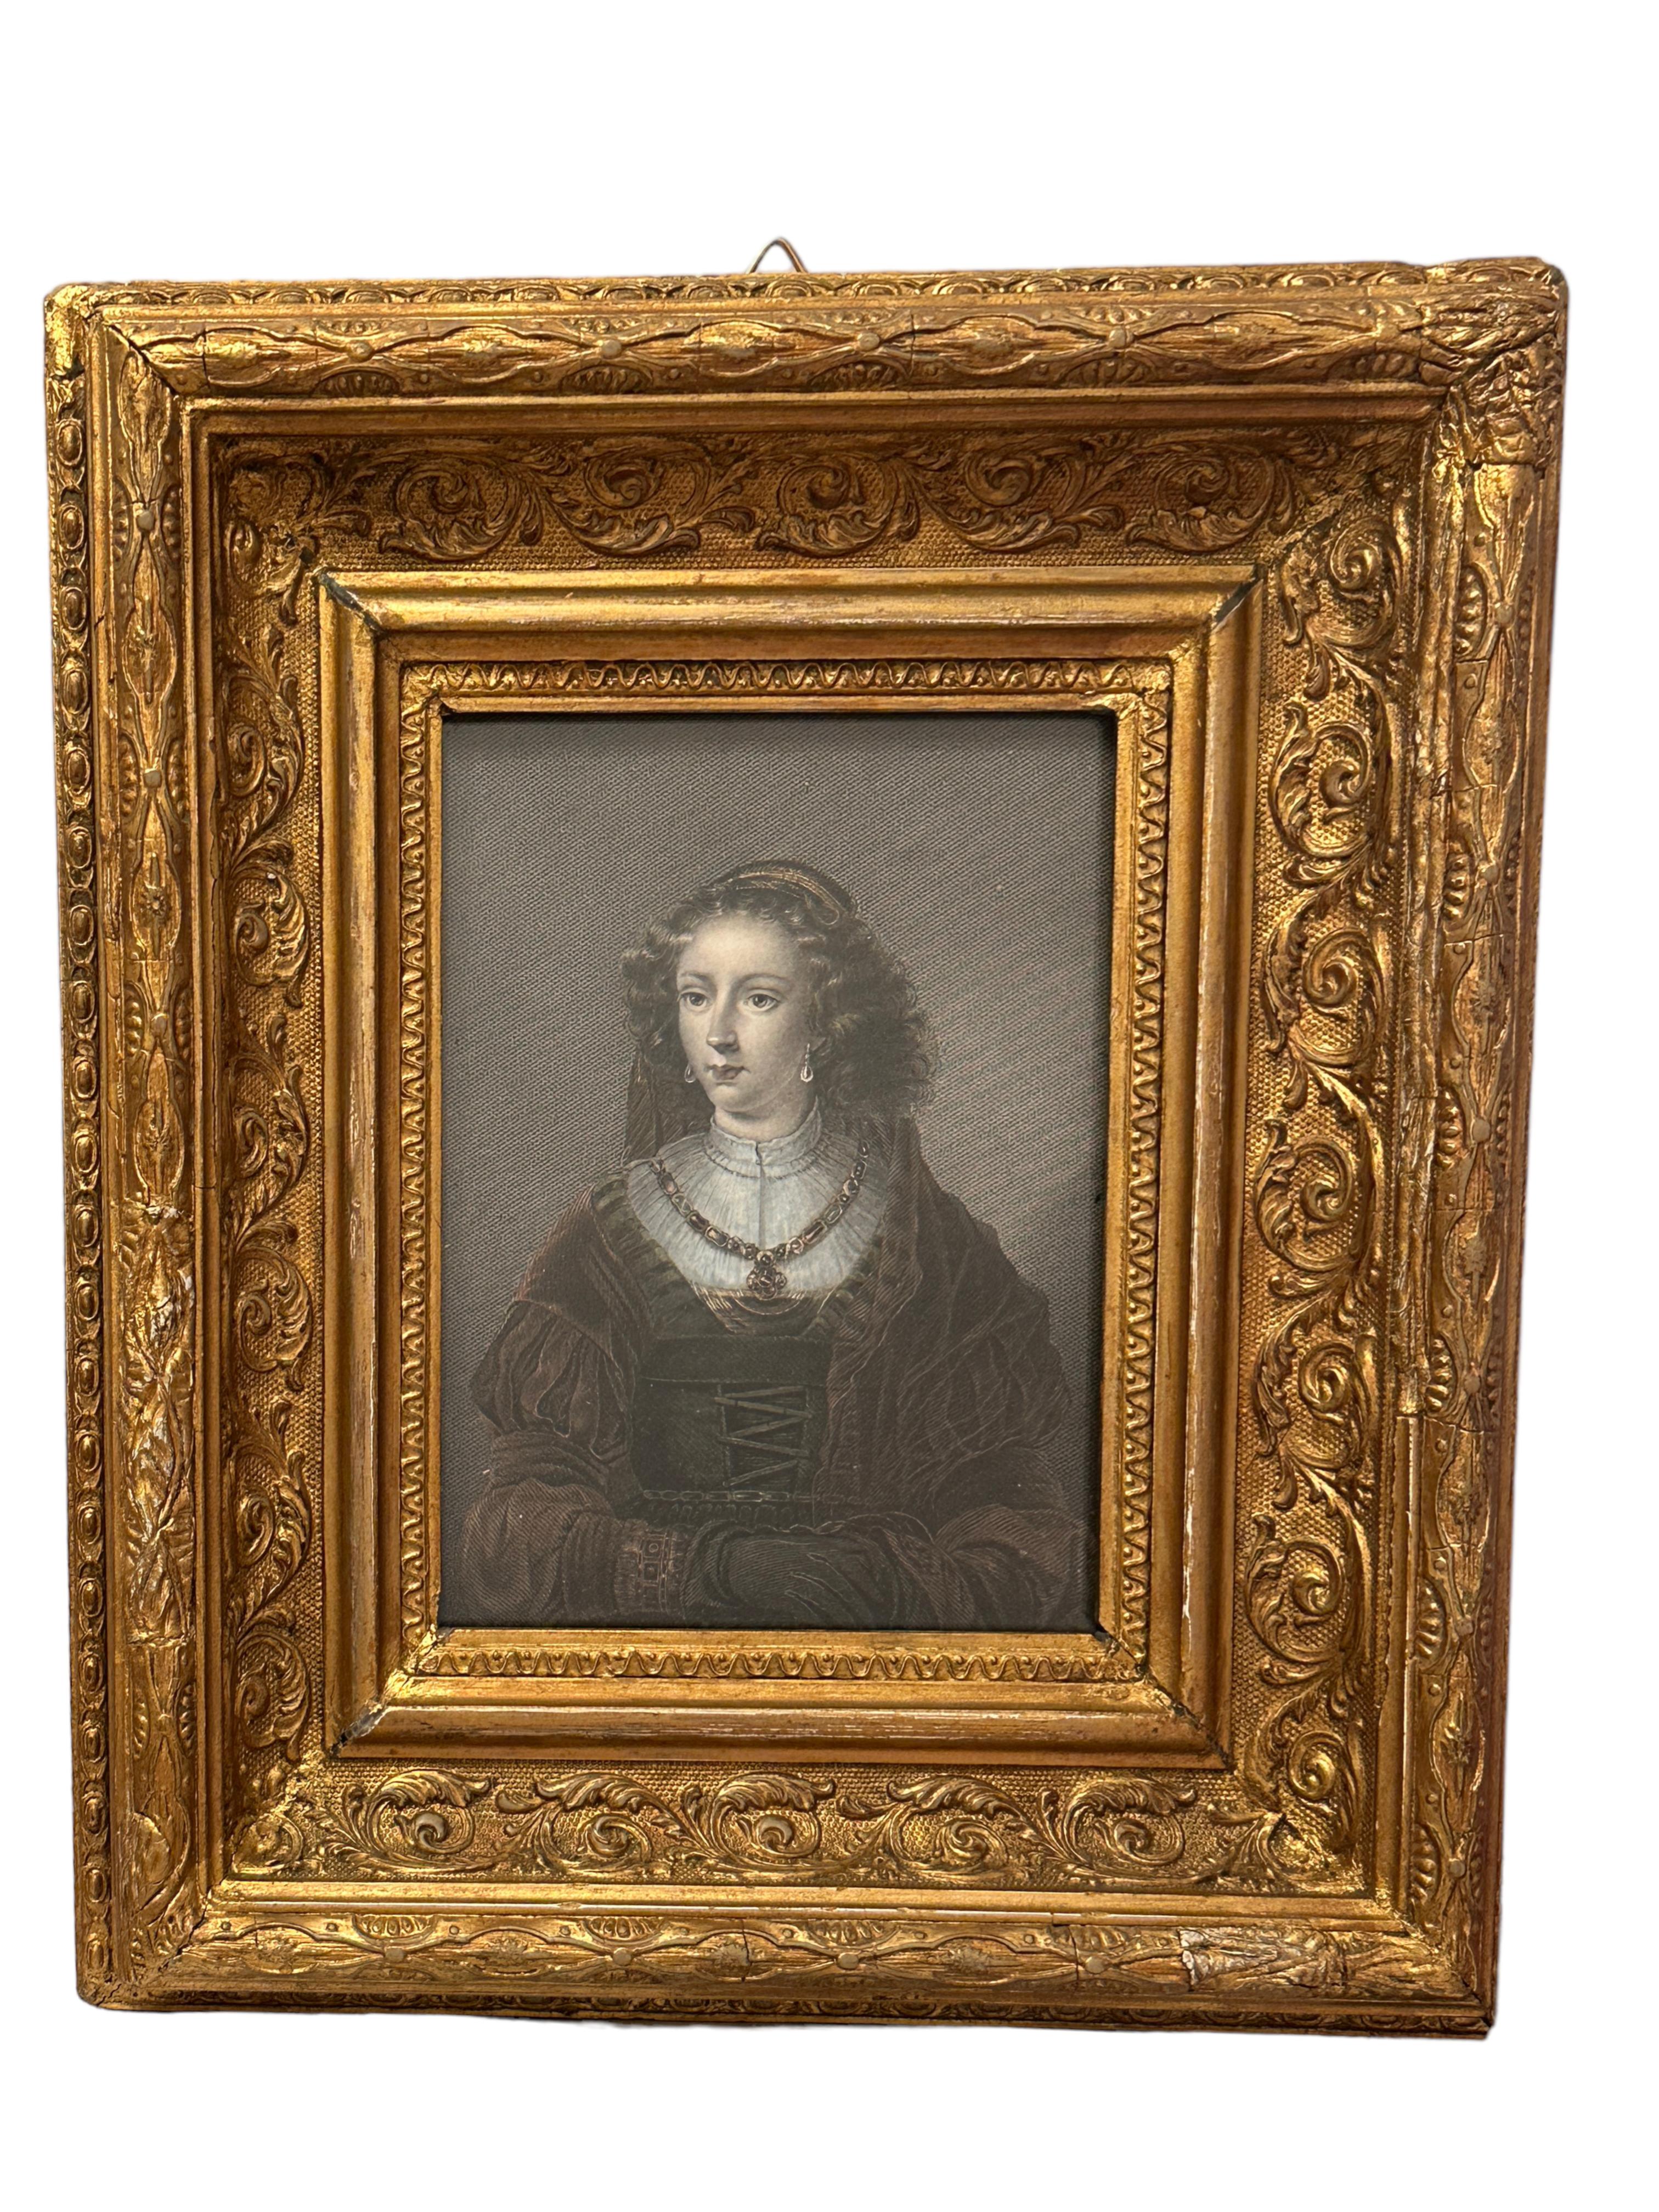 Baroque Framed German Hand Colored Stealing Engraving Portrait of a Noble Lady, 1840s For Sale